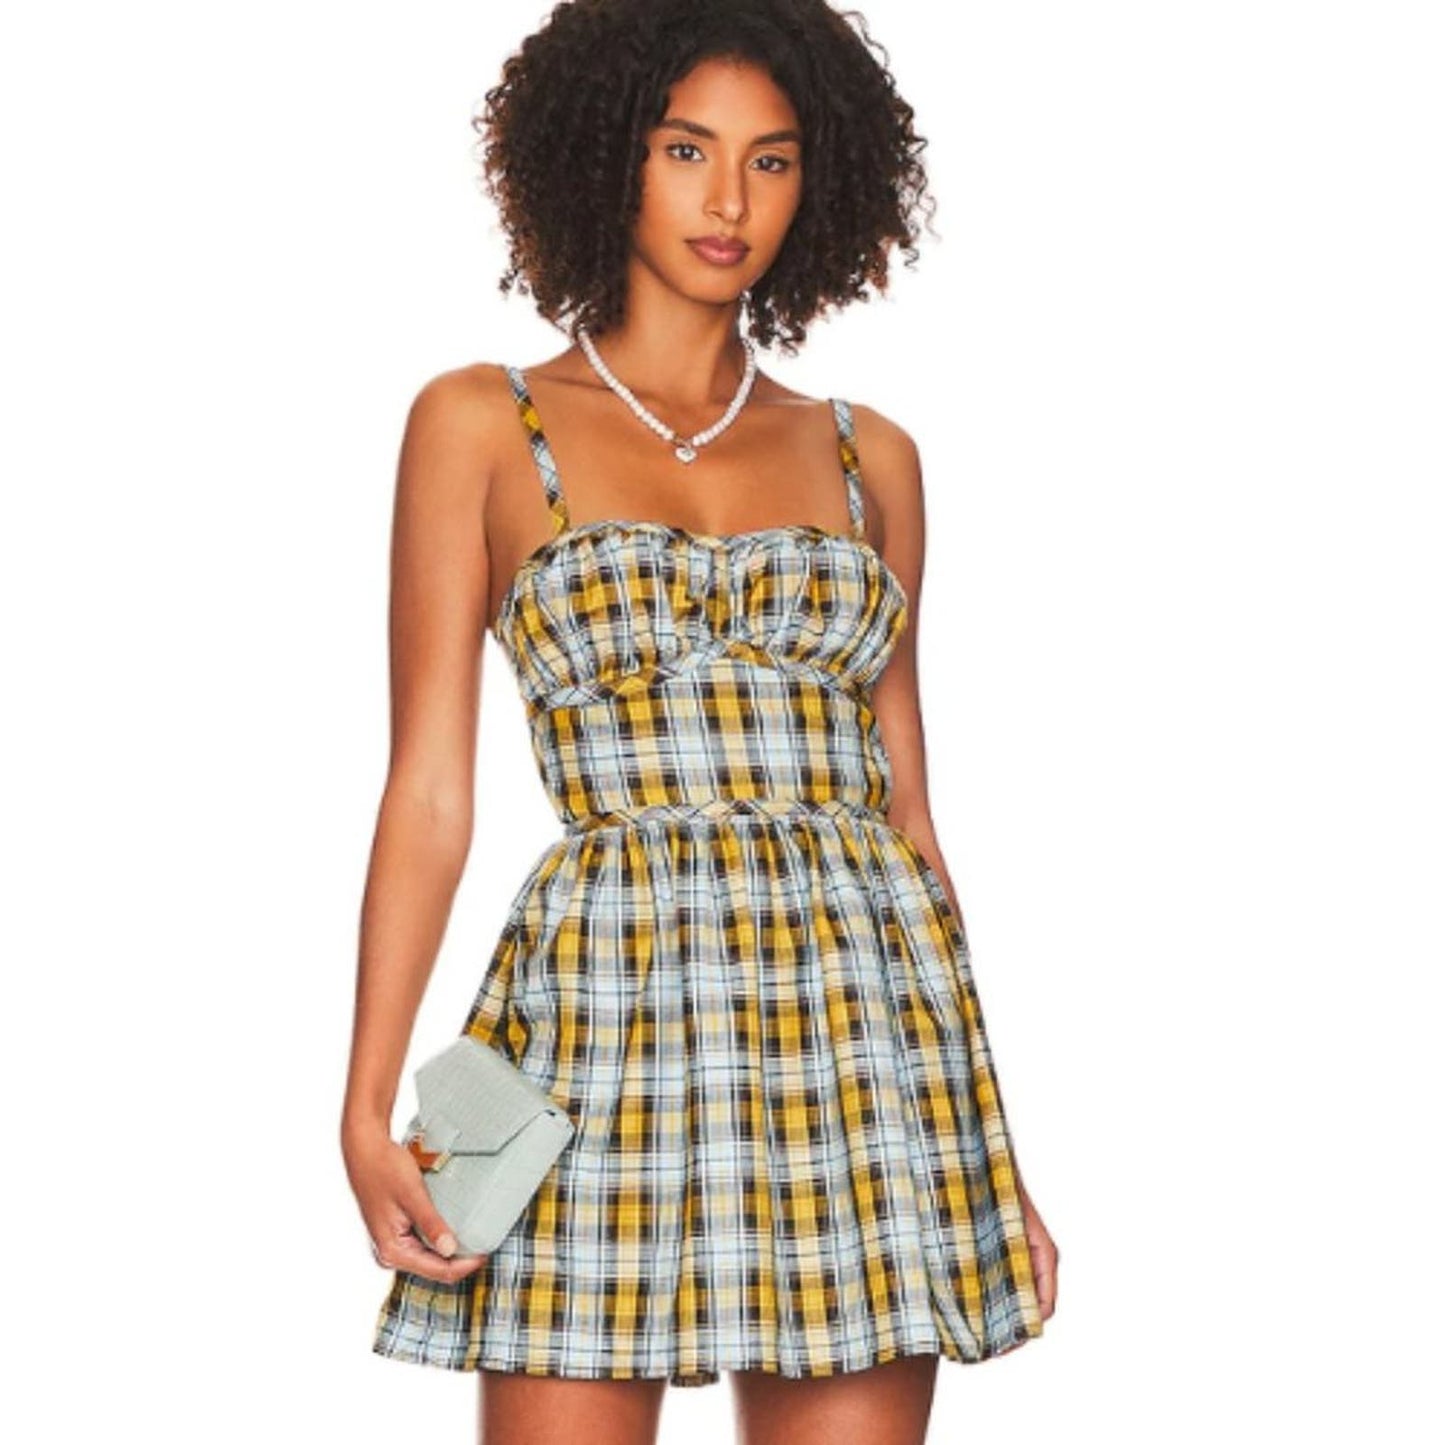 Majorelle Krysta Mini Dress in Yellow and Blue Plaid NWOT Size Small